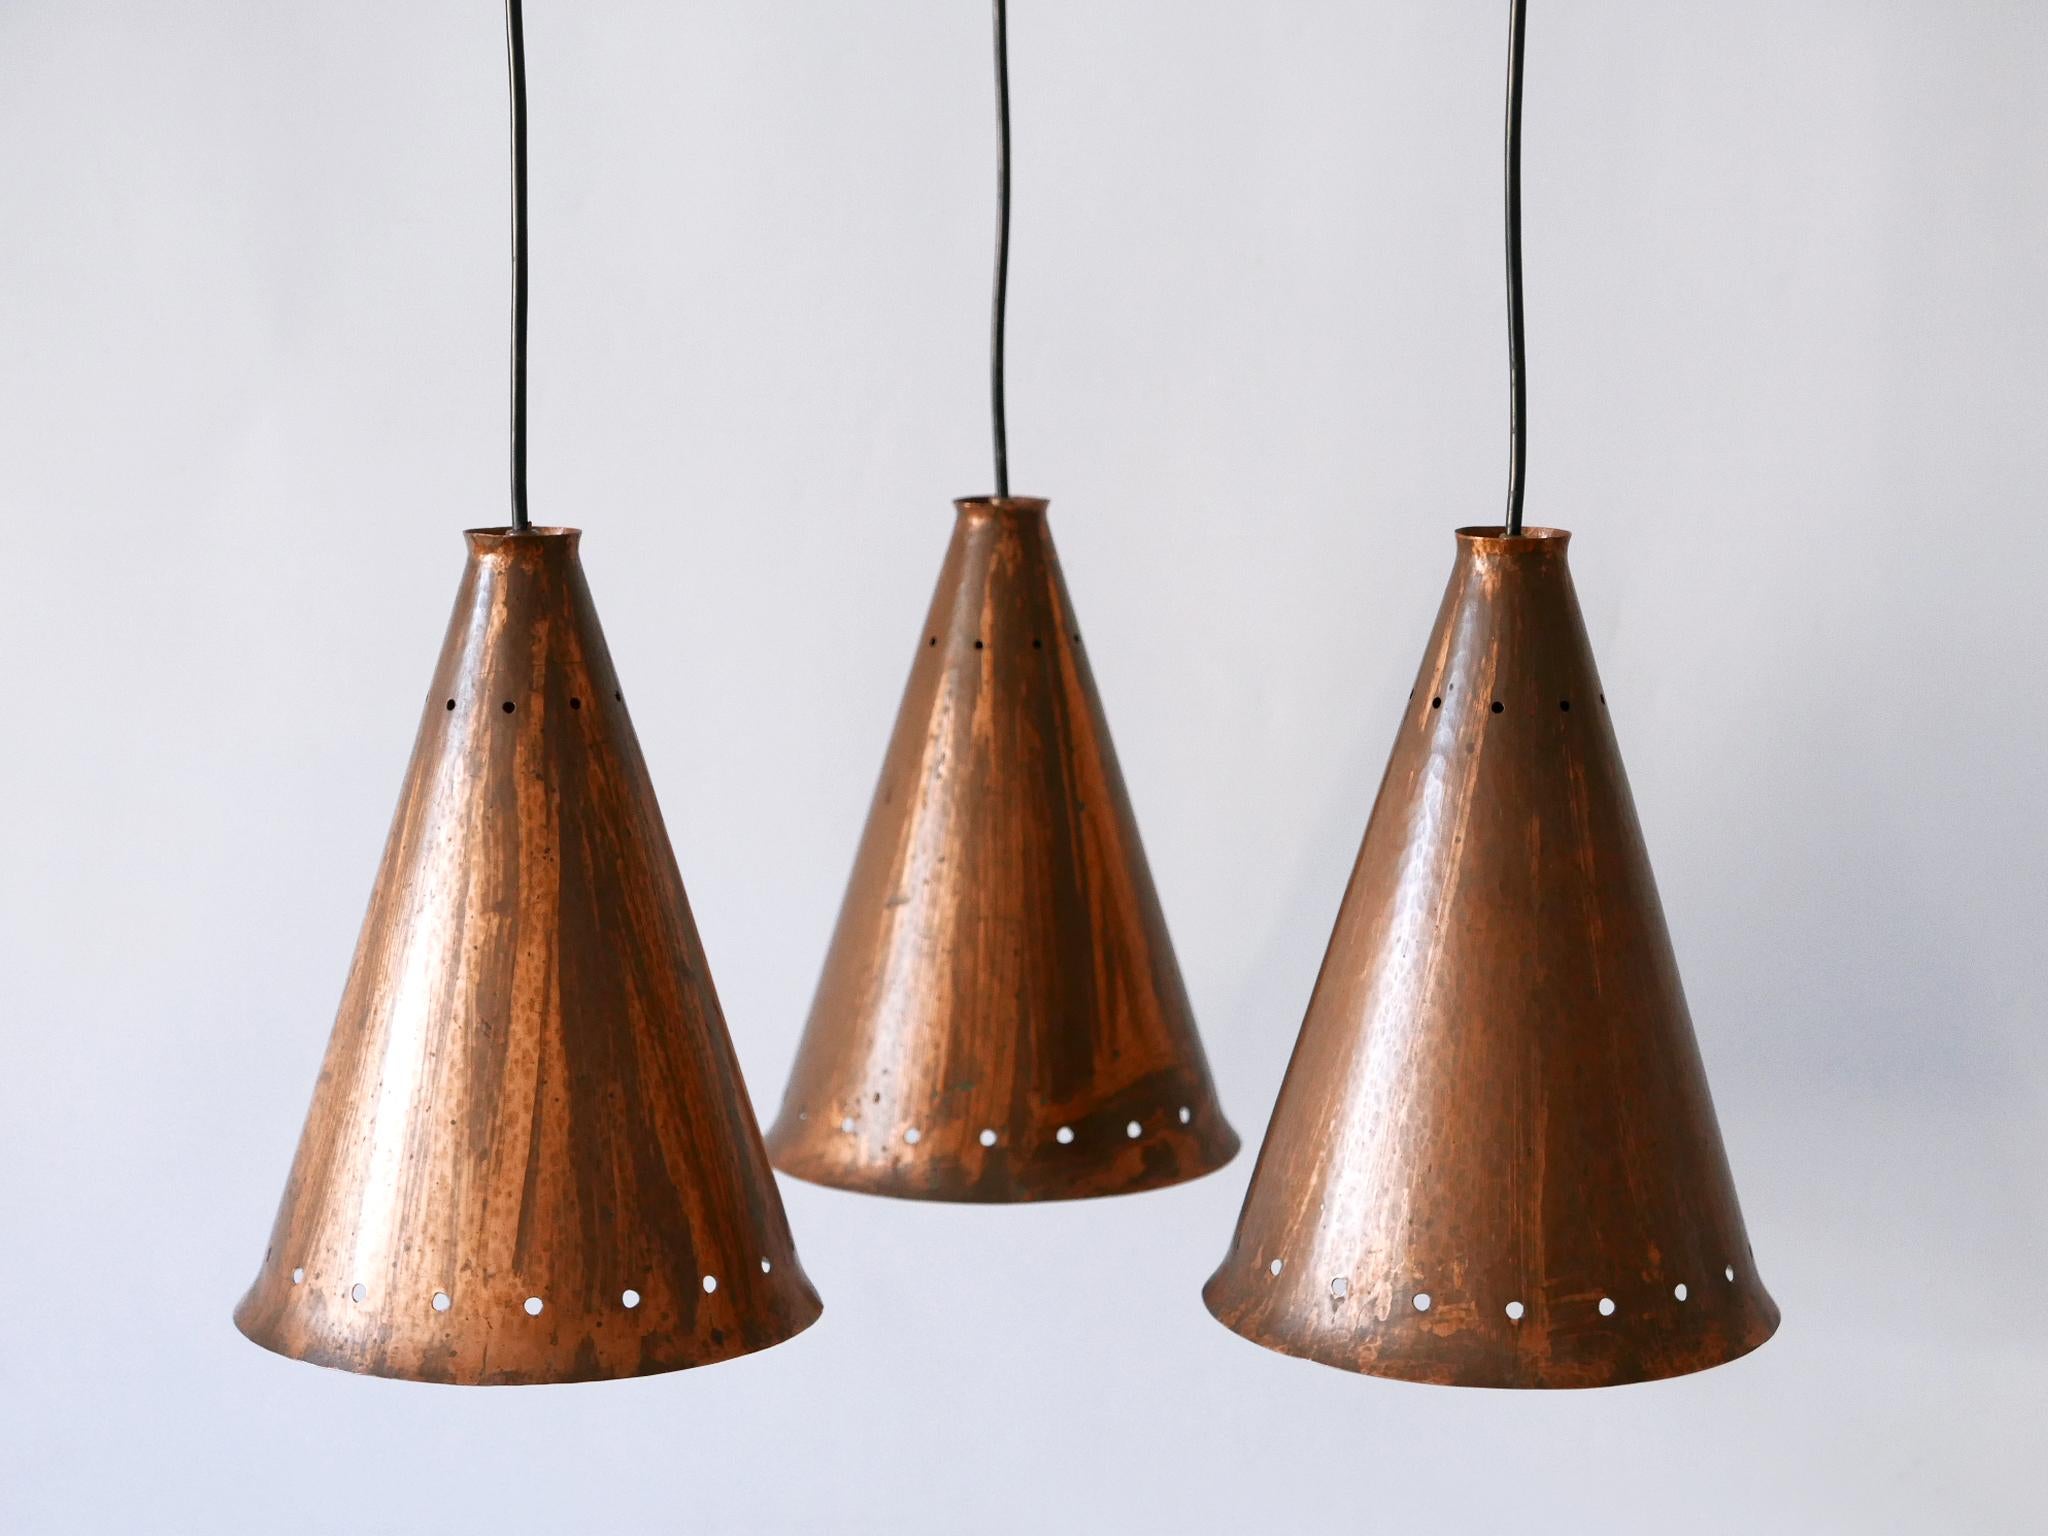 Exceptional & Large Mid-Century Modern Copper Pendant Lamp Scandinavia, 1950s For Sale 4